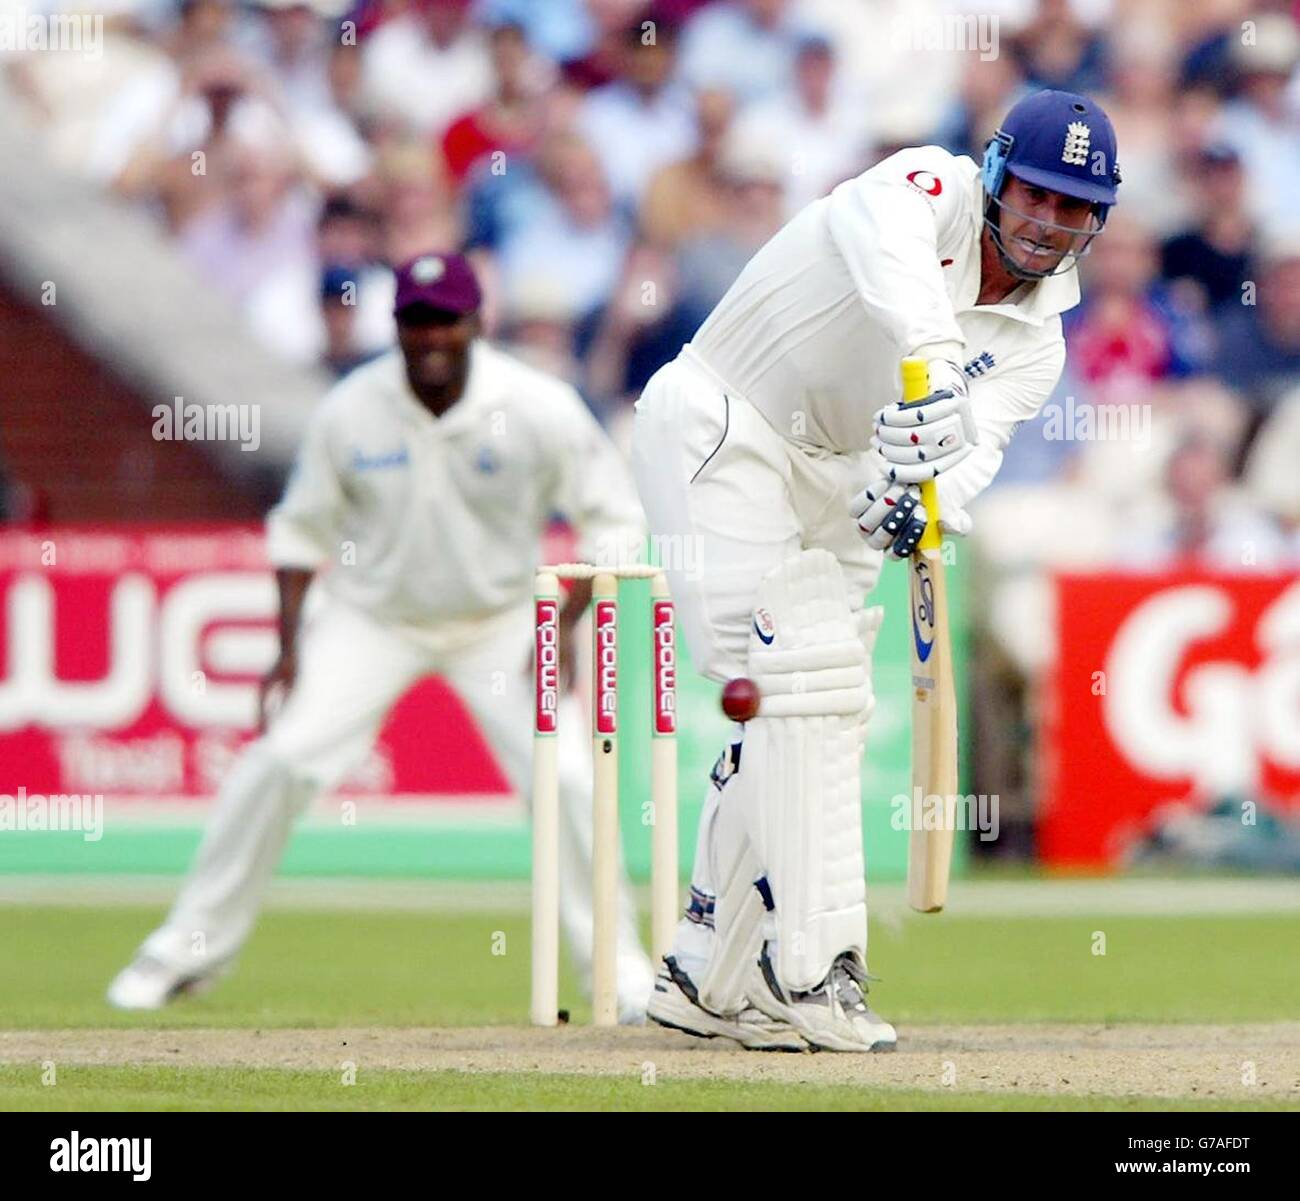 England's Graham Thorpe hits for 4 against the West Indies during the third day of their third npower test at Old Trafford, Manchester. Stock Photo